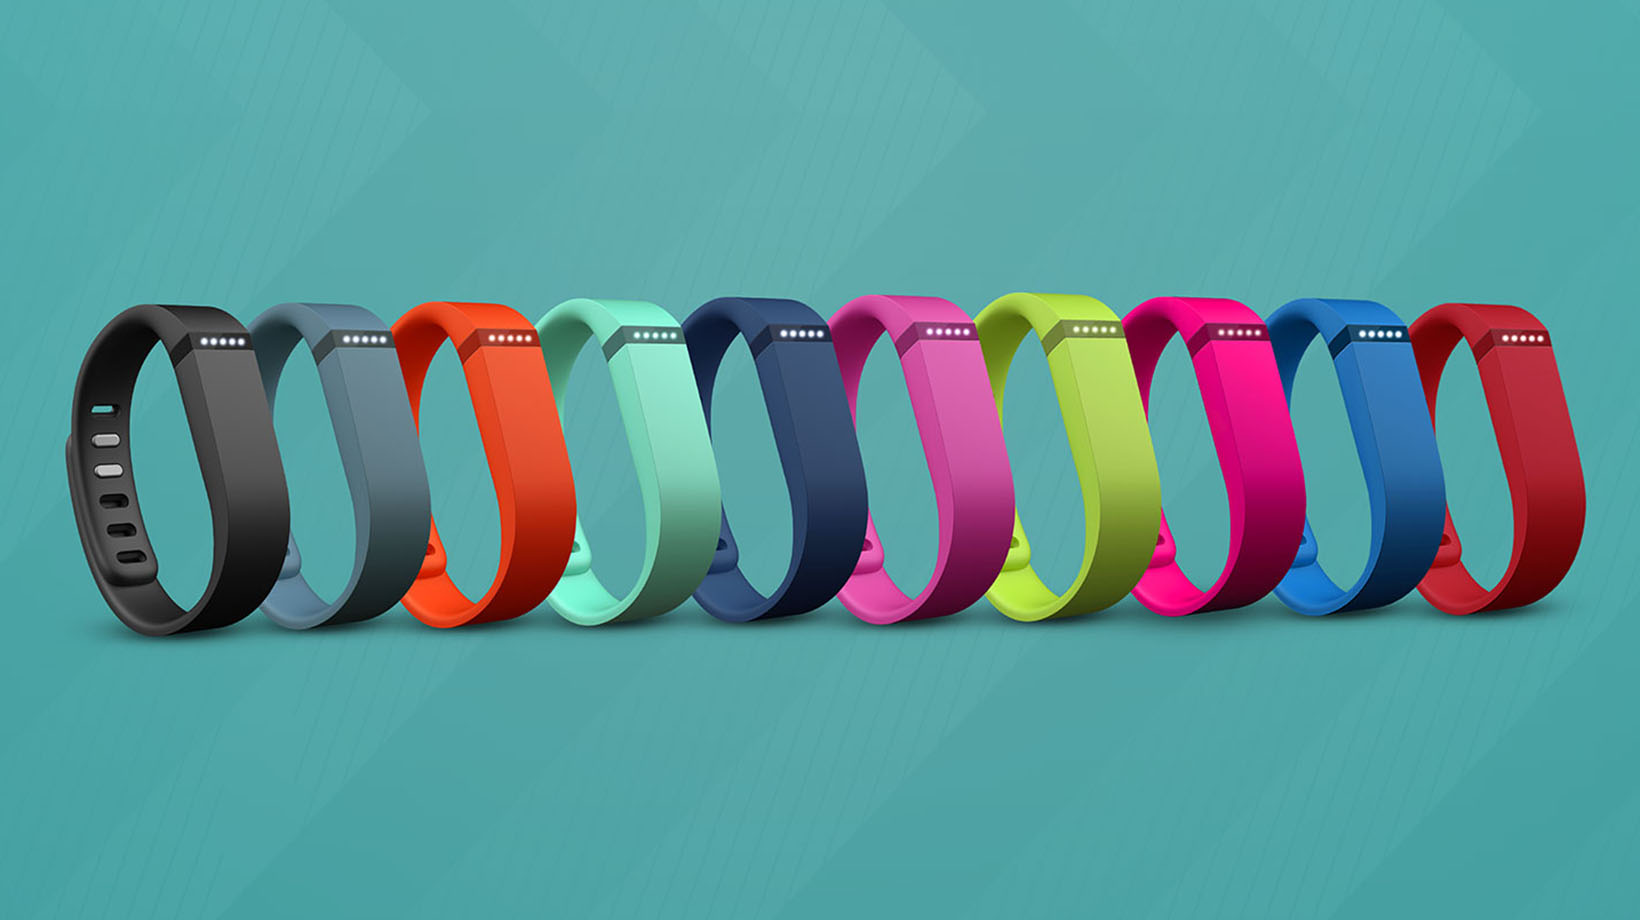 FitBit home workout gear